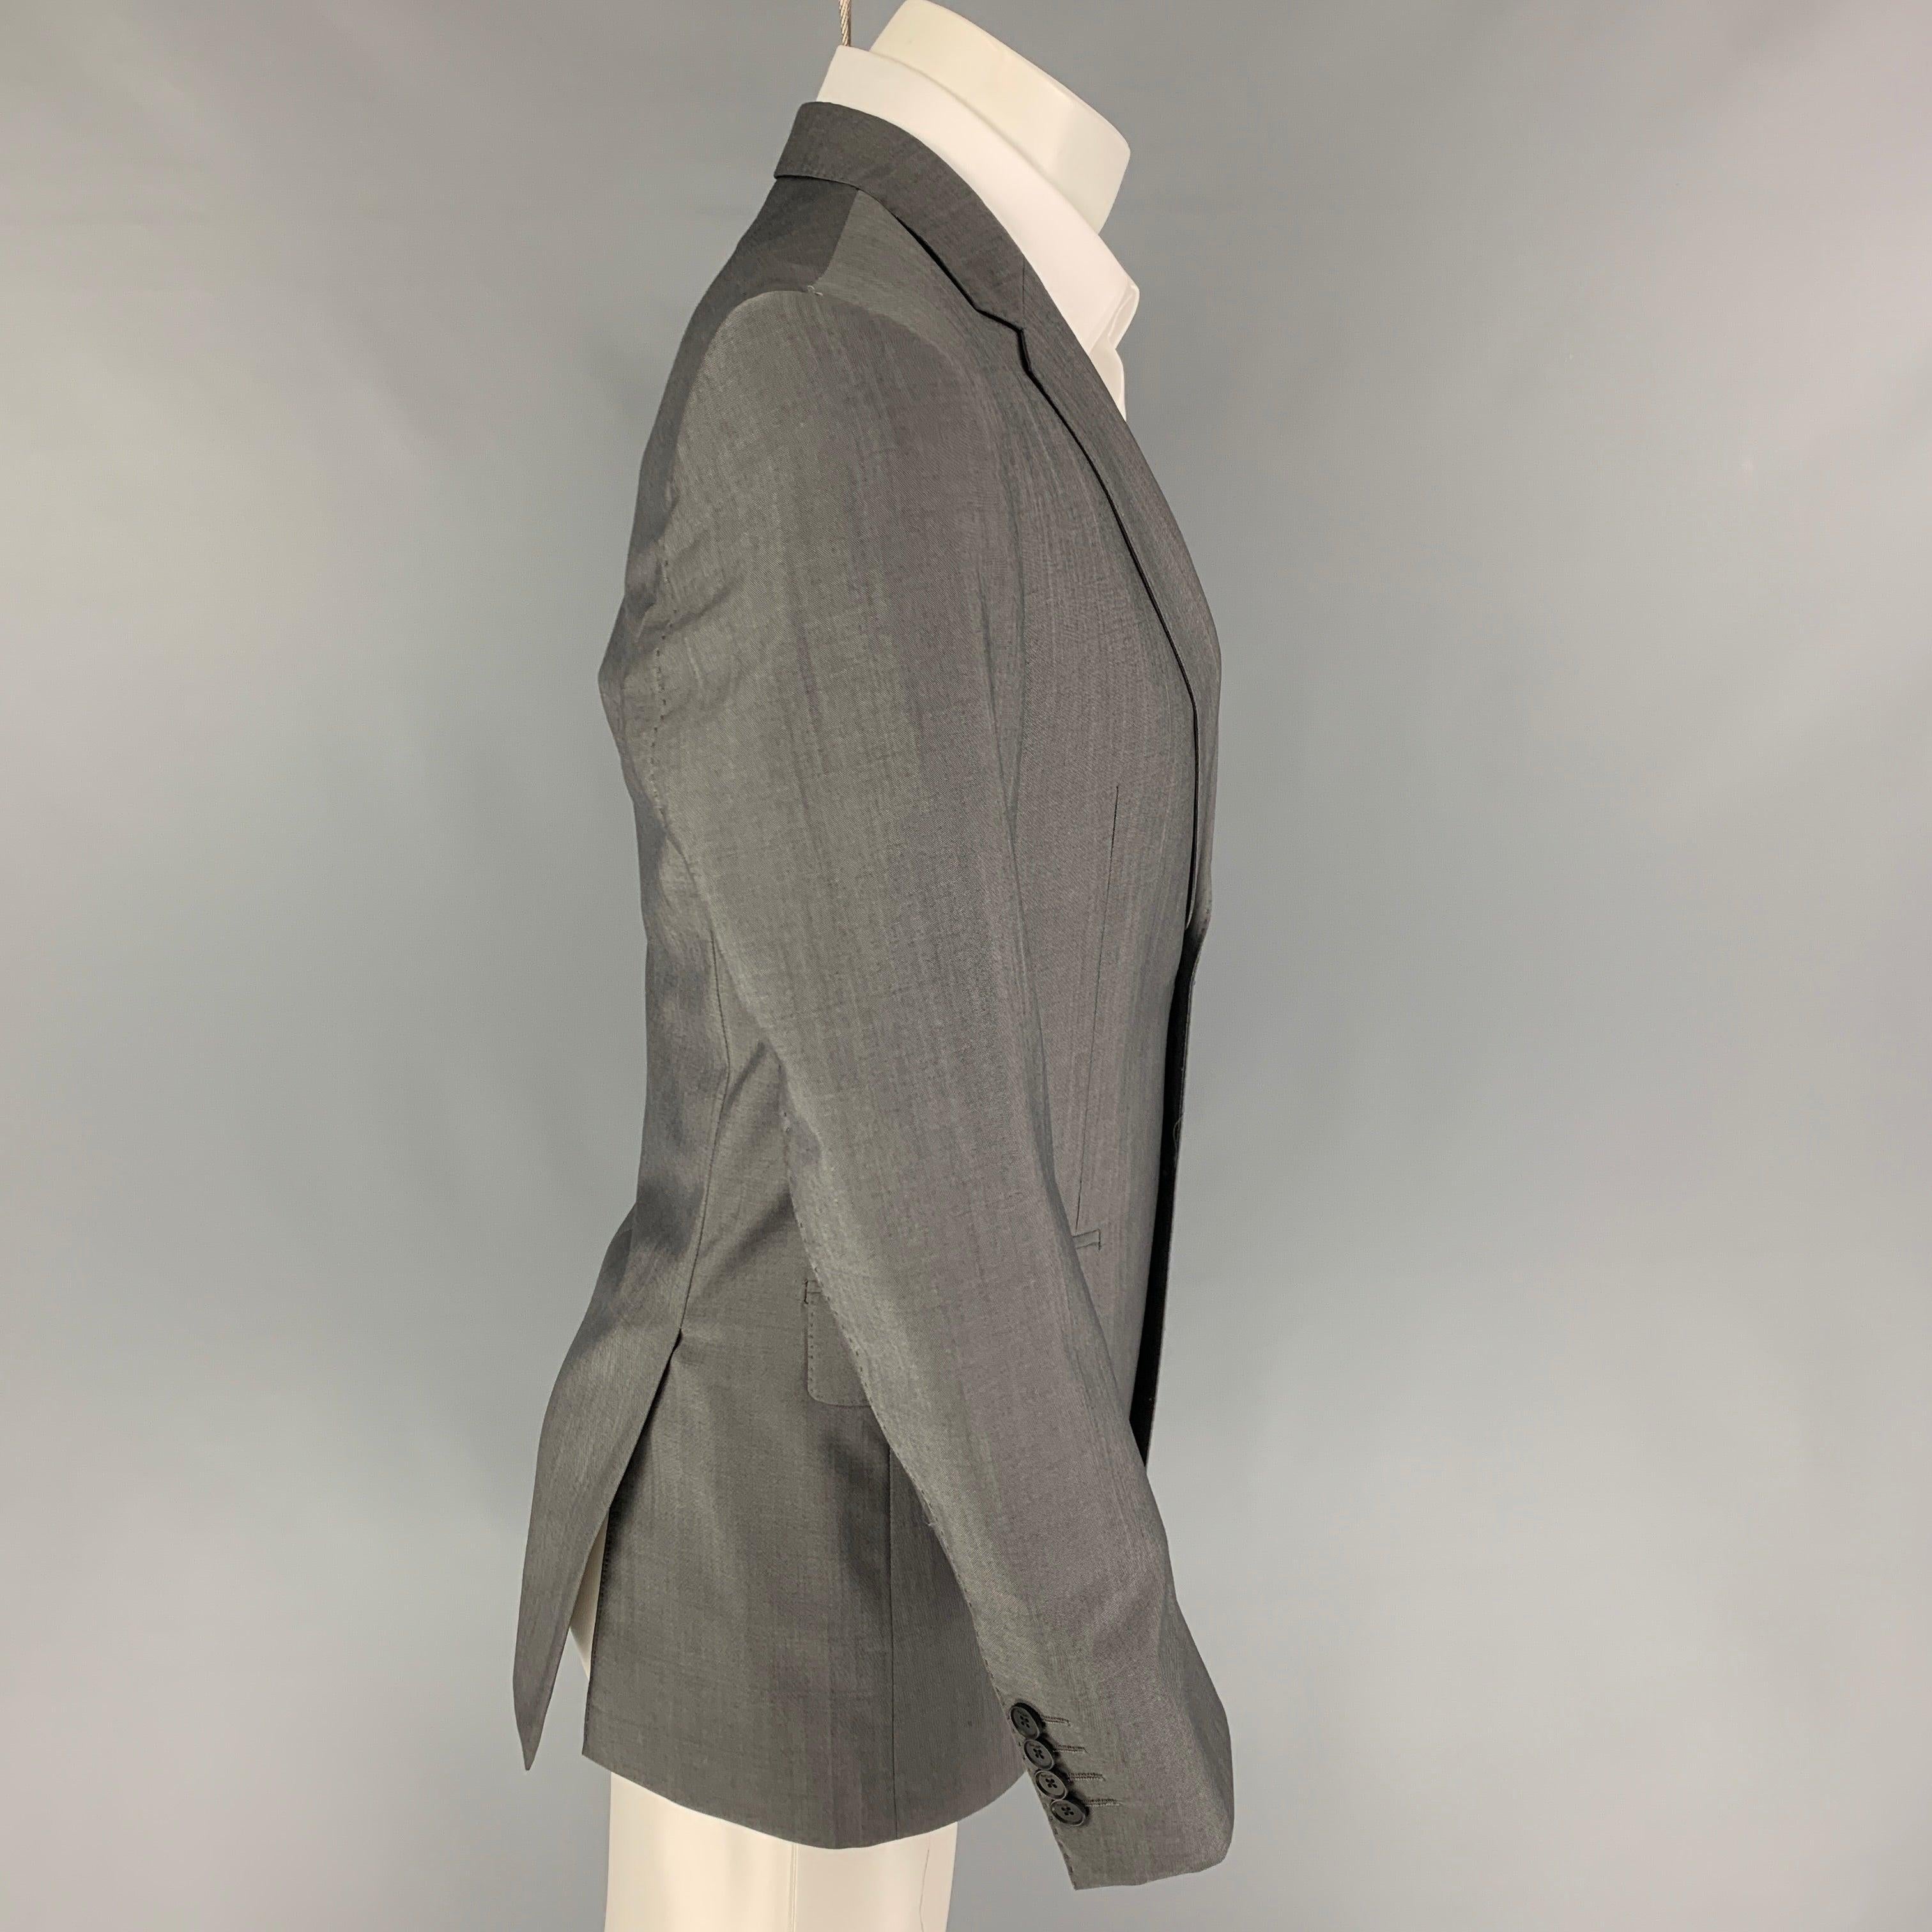 PAUL SMITH 'The Byard' sport coat comes in a grey wool / mohair with a full liner featuring a notch lapel, flap pockets, double back vent, and a double button closure. Made in Italy.
Very Good
Pre-Owned Condition. 

Marked:   36 

Measurements: 
